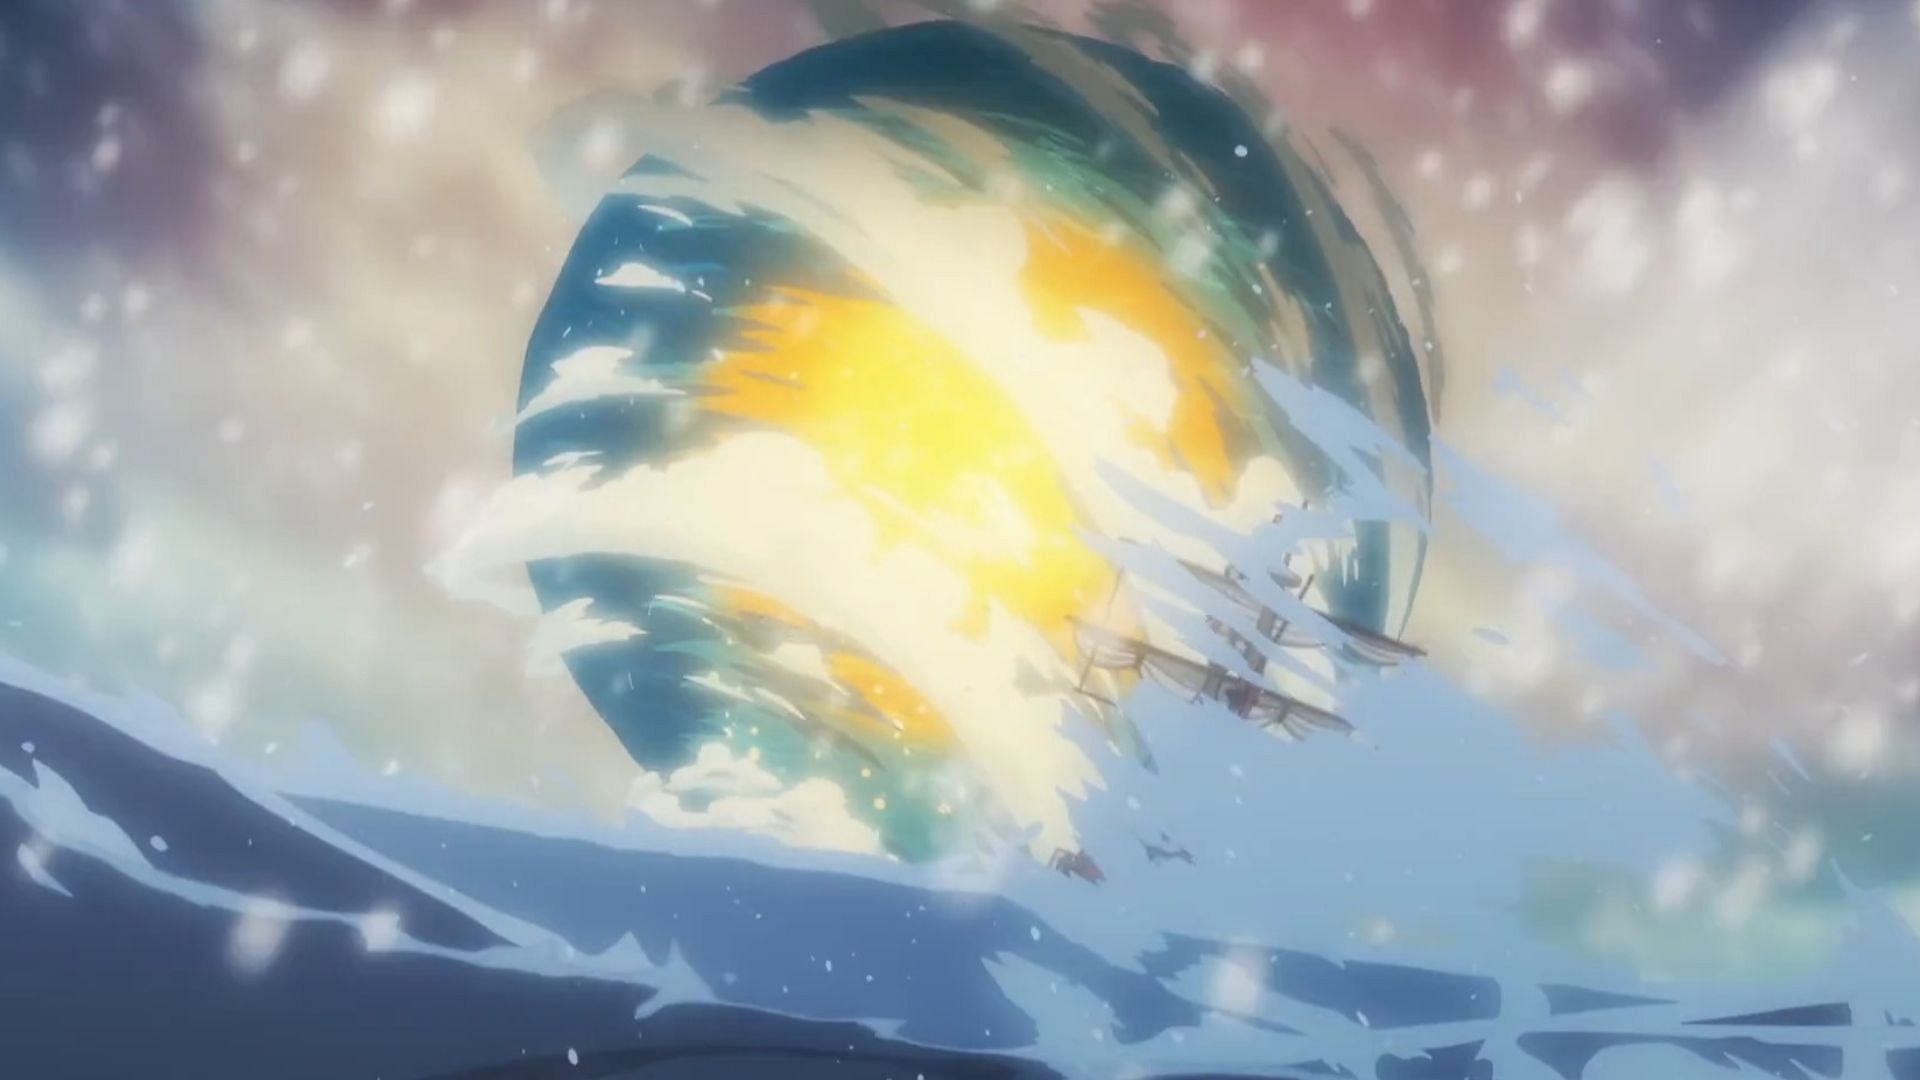 The Eddy formation as seen in One Piece episode 1089 (Image via Toei Animation)